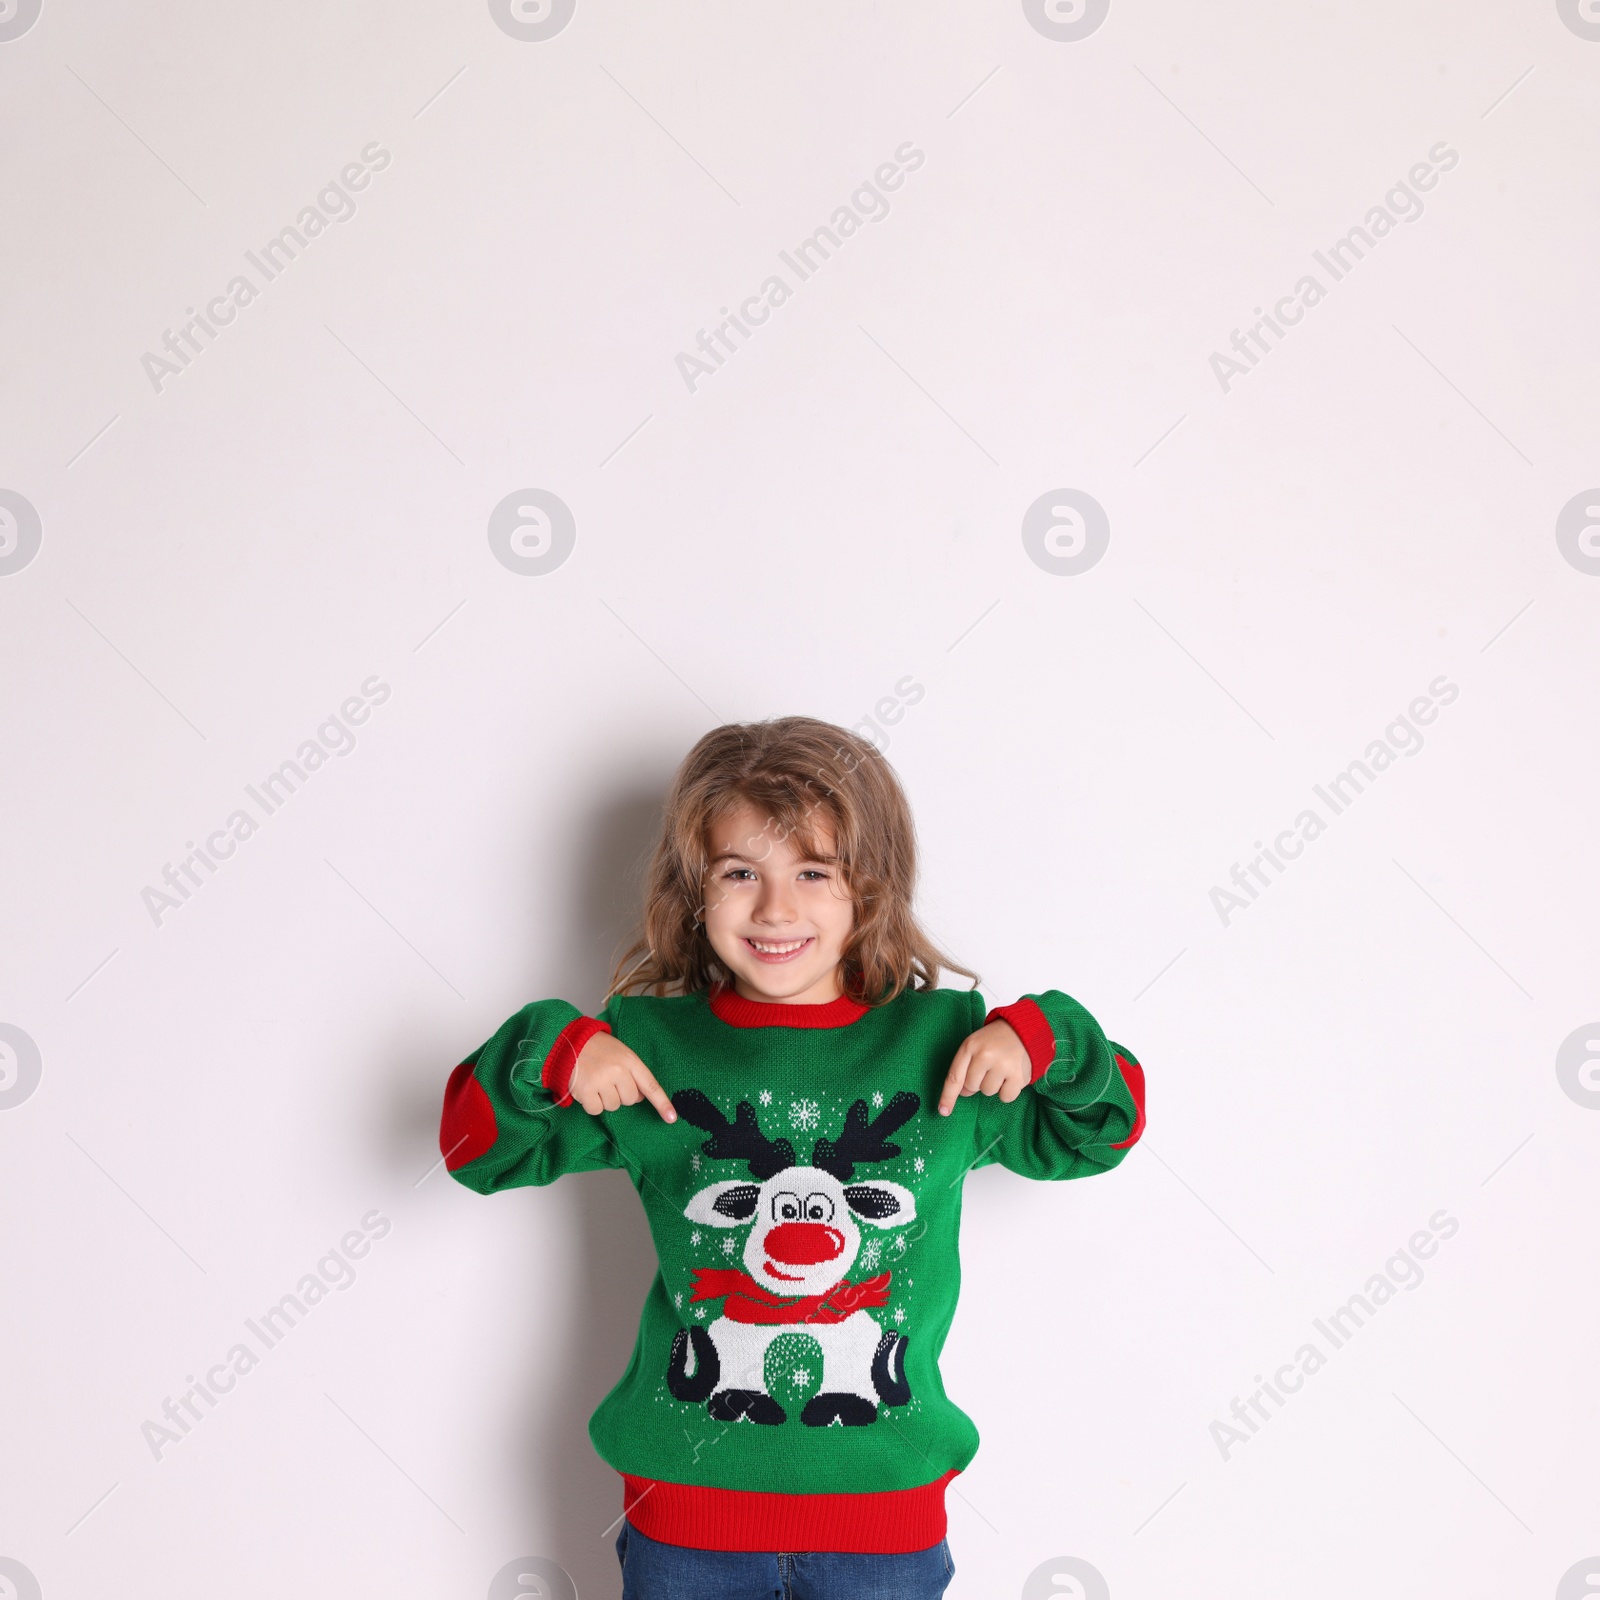 Photo of Cute little girl pointing at her green Christmas sweater against white background